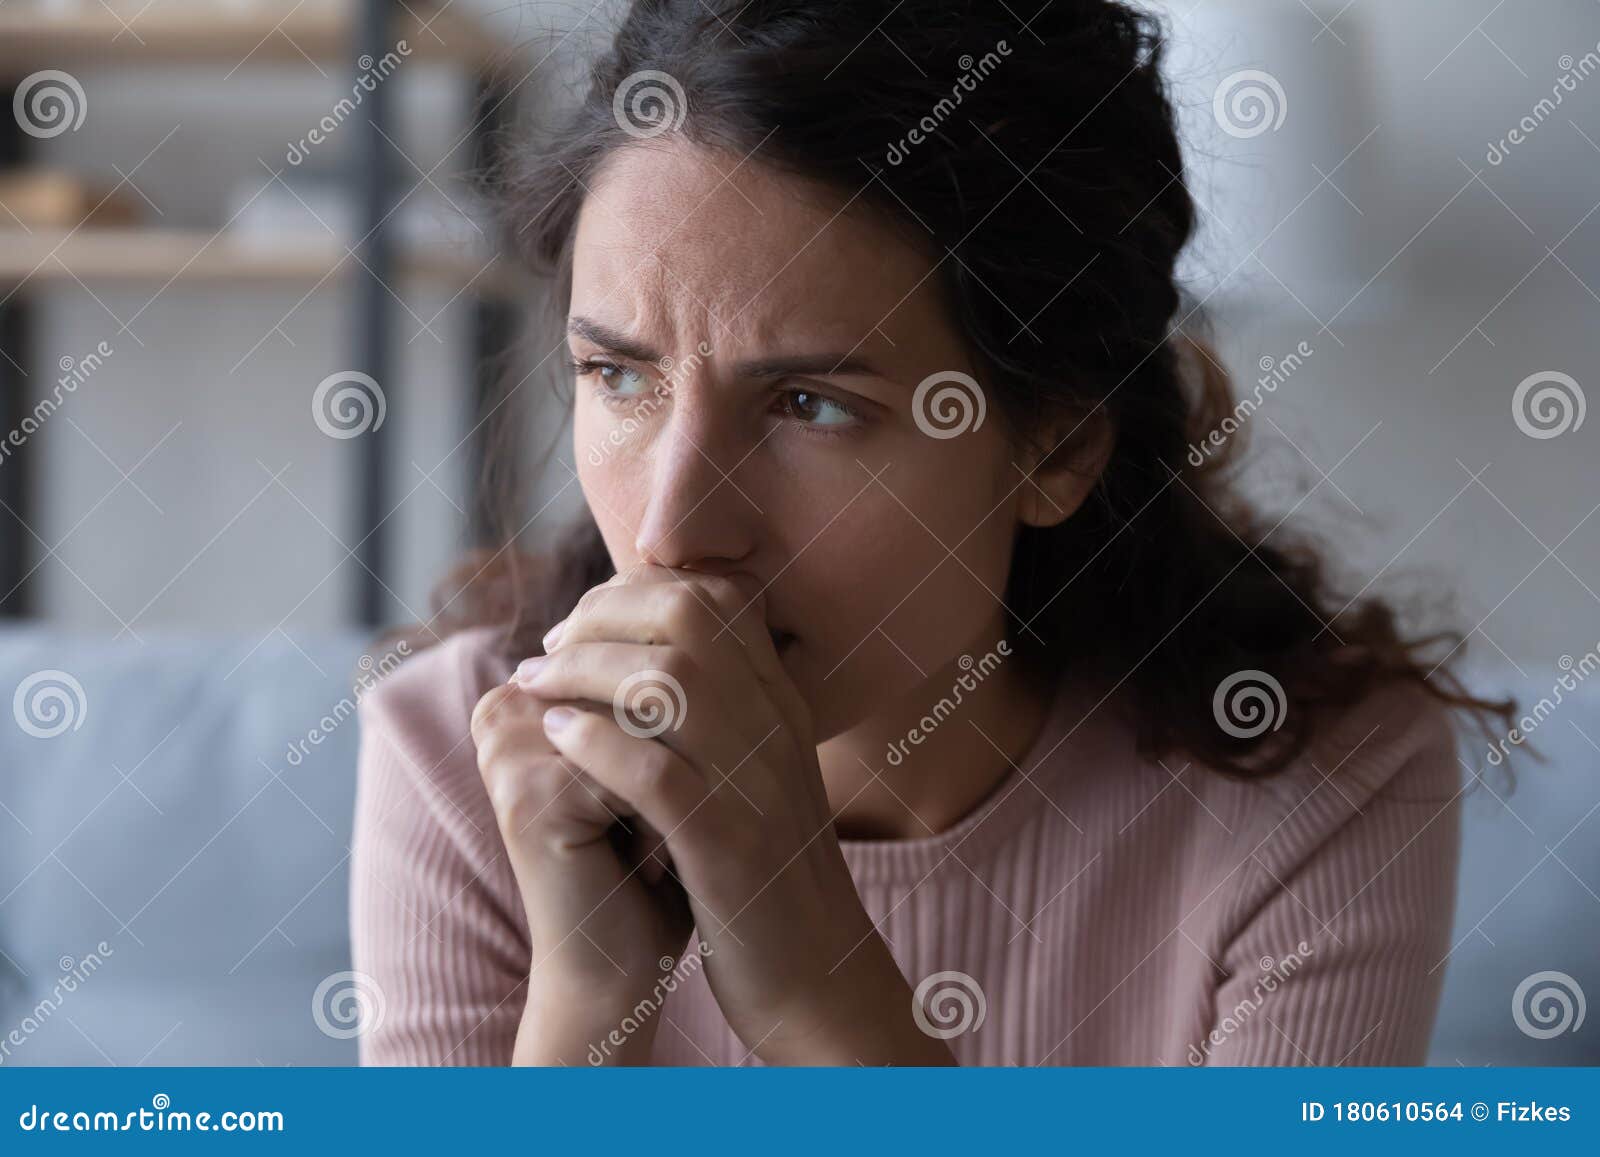 frustrated stressed young woman thinking of difficult decision.